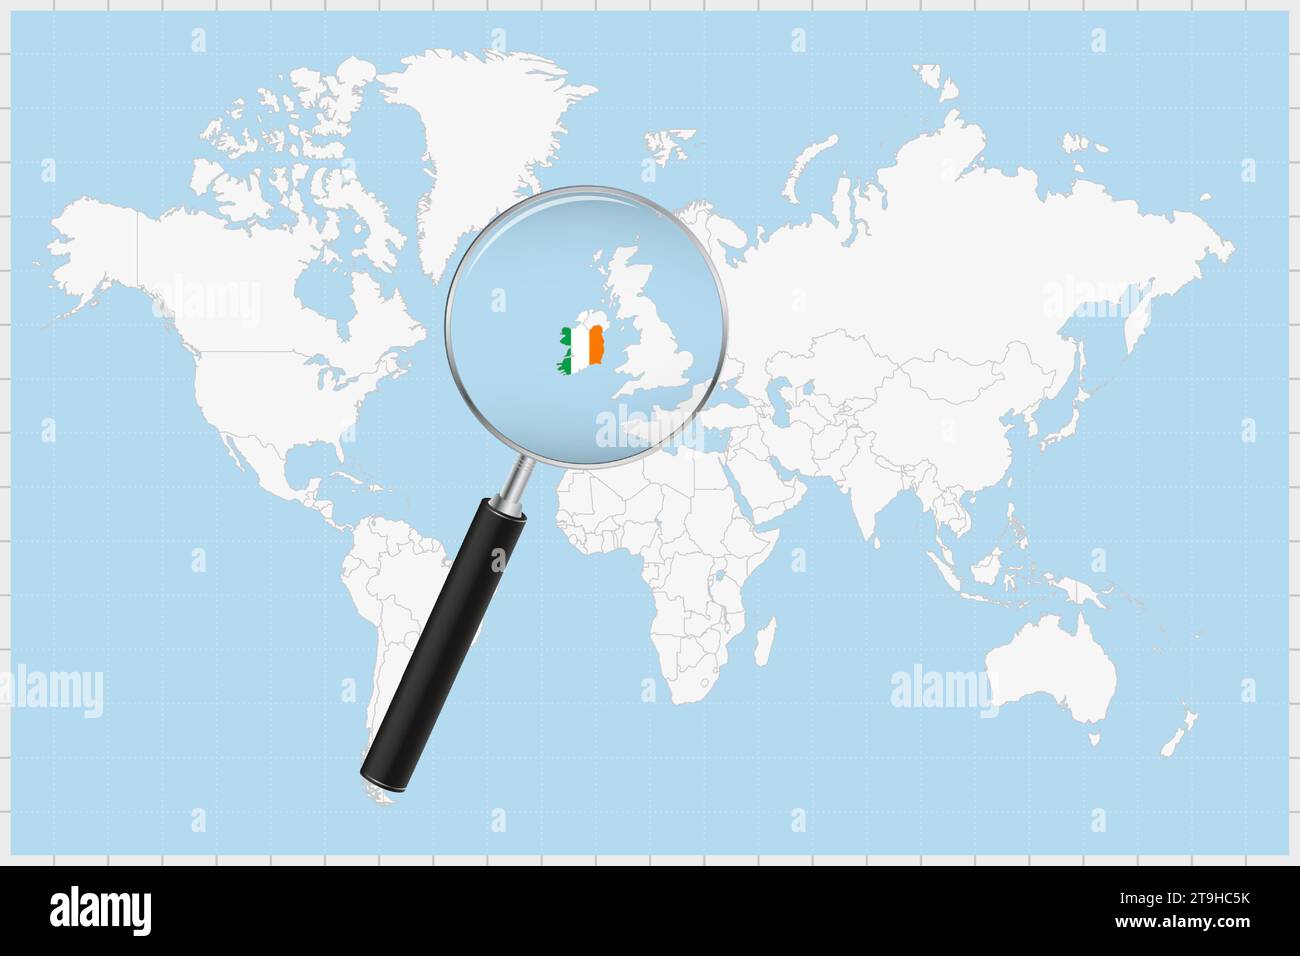 Magnifying glass showing a map of Ireland on a world map. Ireland flag and map enlarge in lens. Vector Illustration. Stock Vector